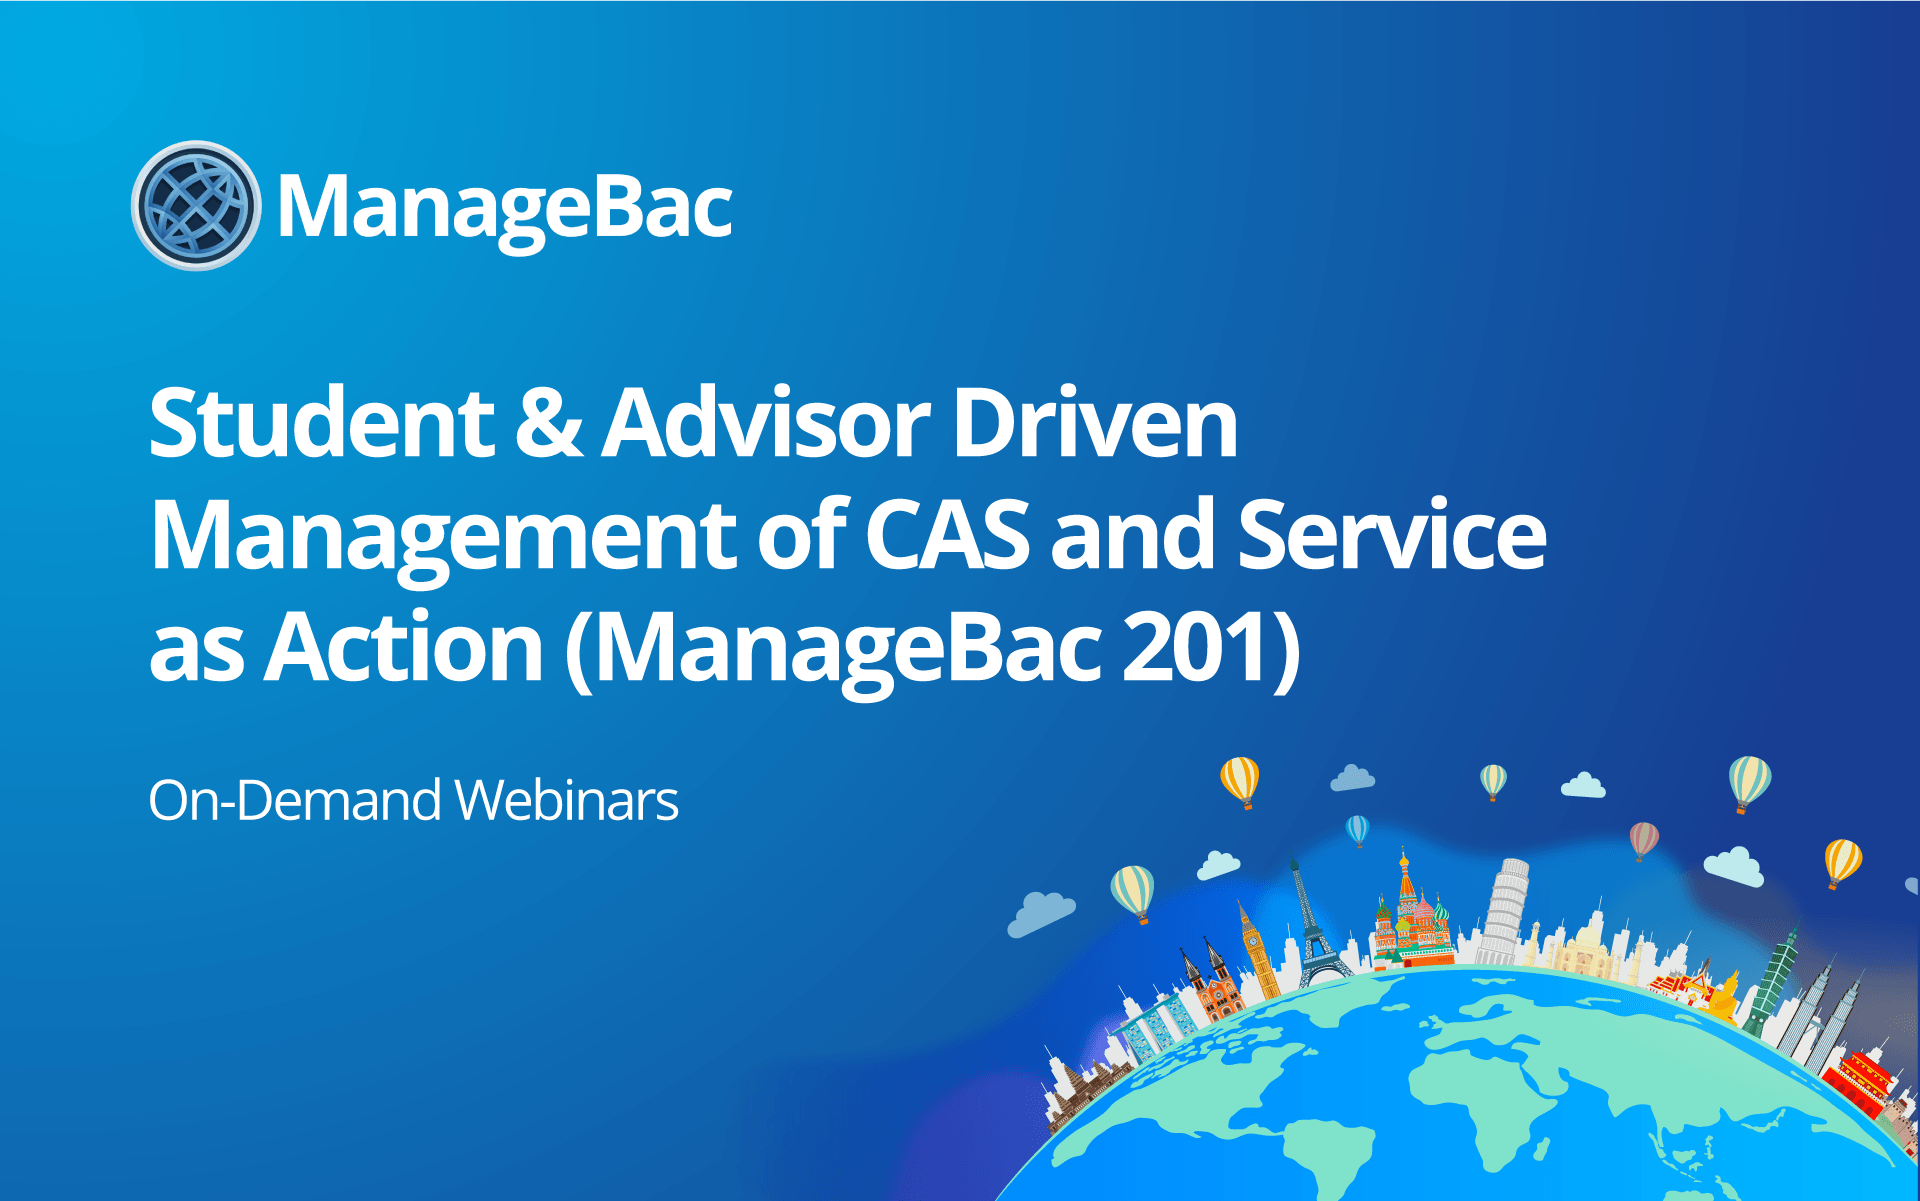 Student & Advisor driven management of CAS and Service as Action (ManageBac 201)